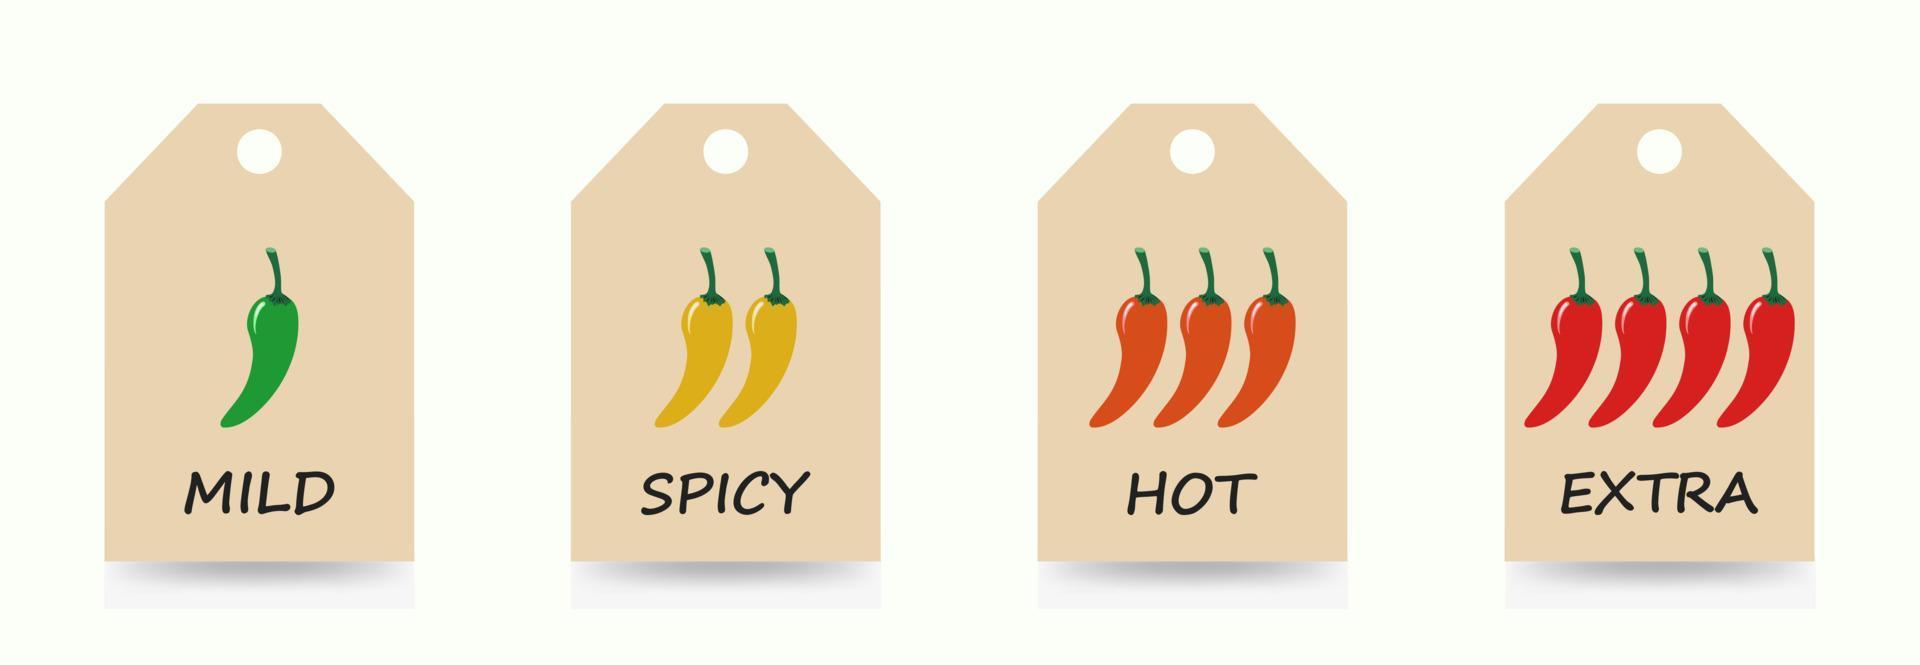 Spicy chili pepper sauce level scale on labels. Traditional Mexican and Chinese spicy food in four levels and colors - mild, spicy, hot and extra. Vector illustration isolated on a white background.